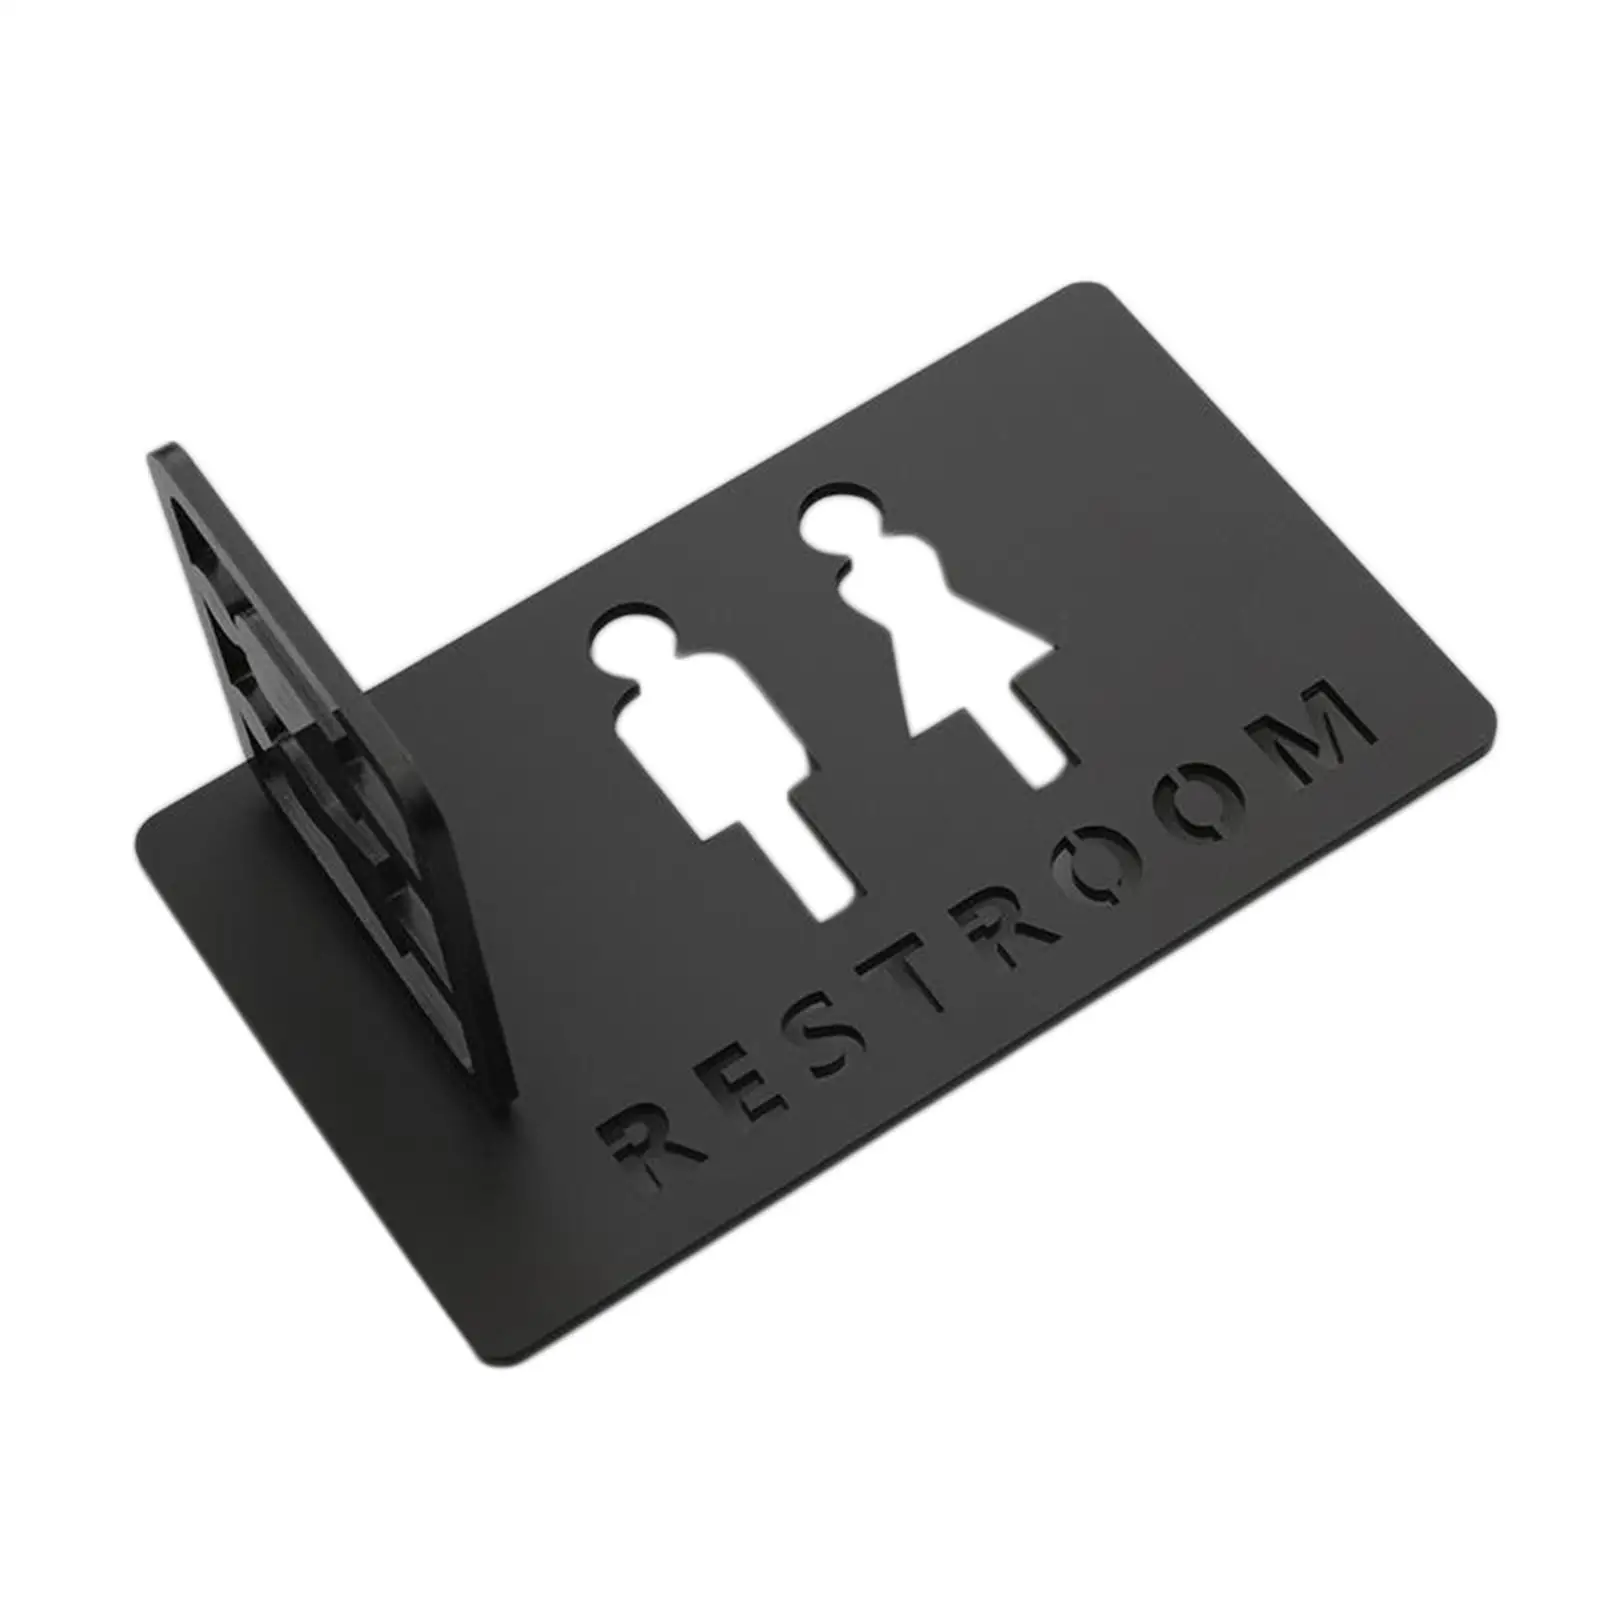 Acrylic Toilet Sign Bathroom Sign Side Mount Signage for Shop Parking Mall